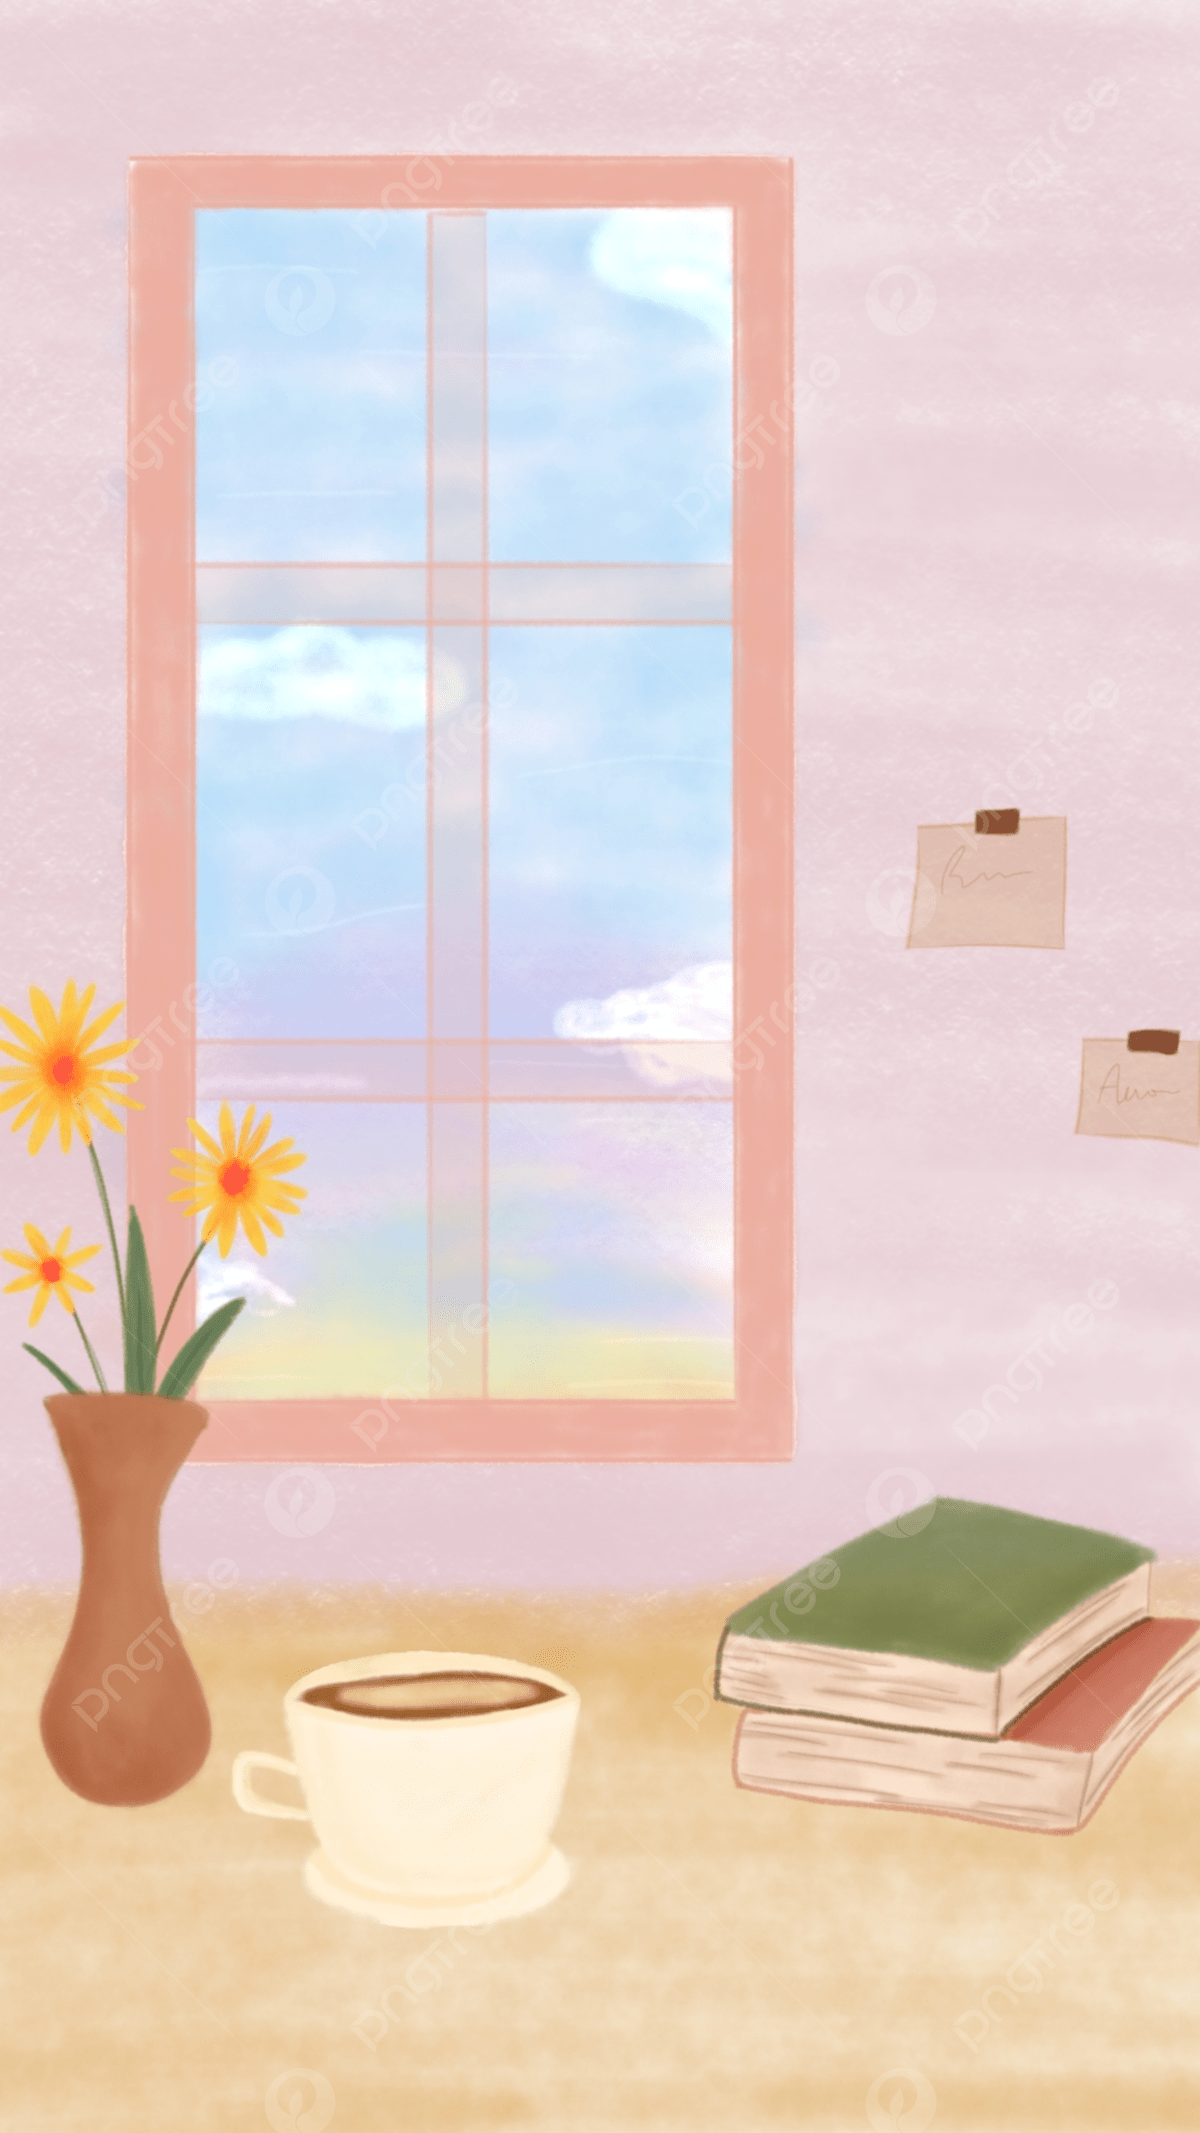 A painting of a window with a vase of flowers and a cup of coffee on the sill. - Illustration